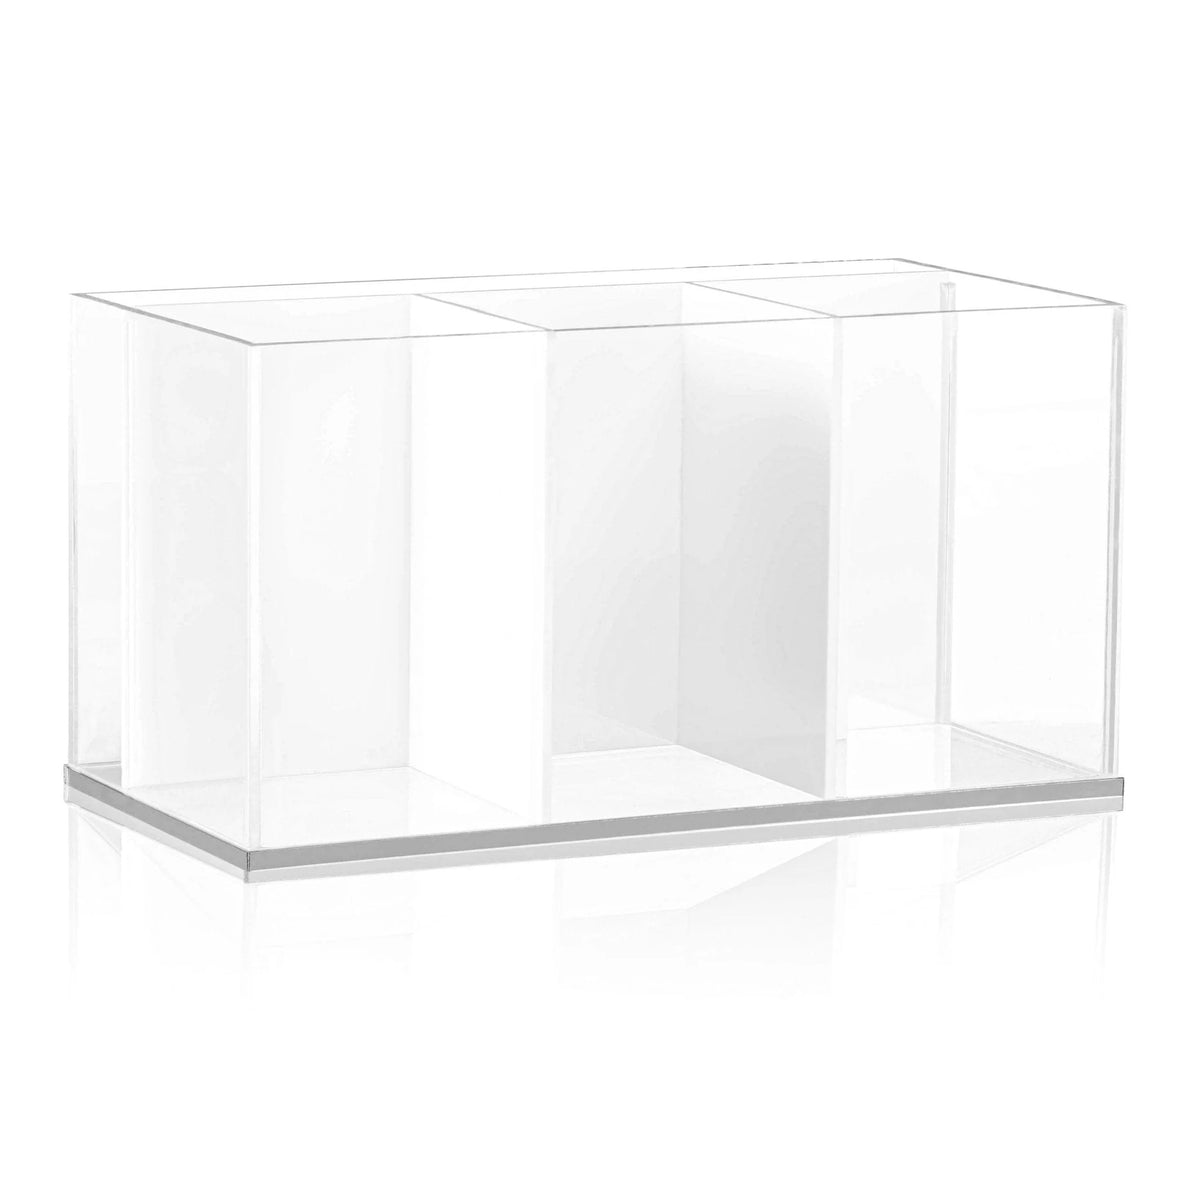 Waterdale Classic Silverware Caddy Lucite With Silver Border, 3 Compartments, Dimensions: 8"x4"x4.5"